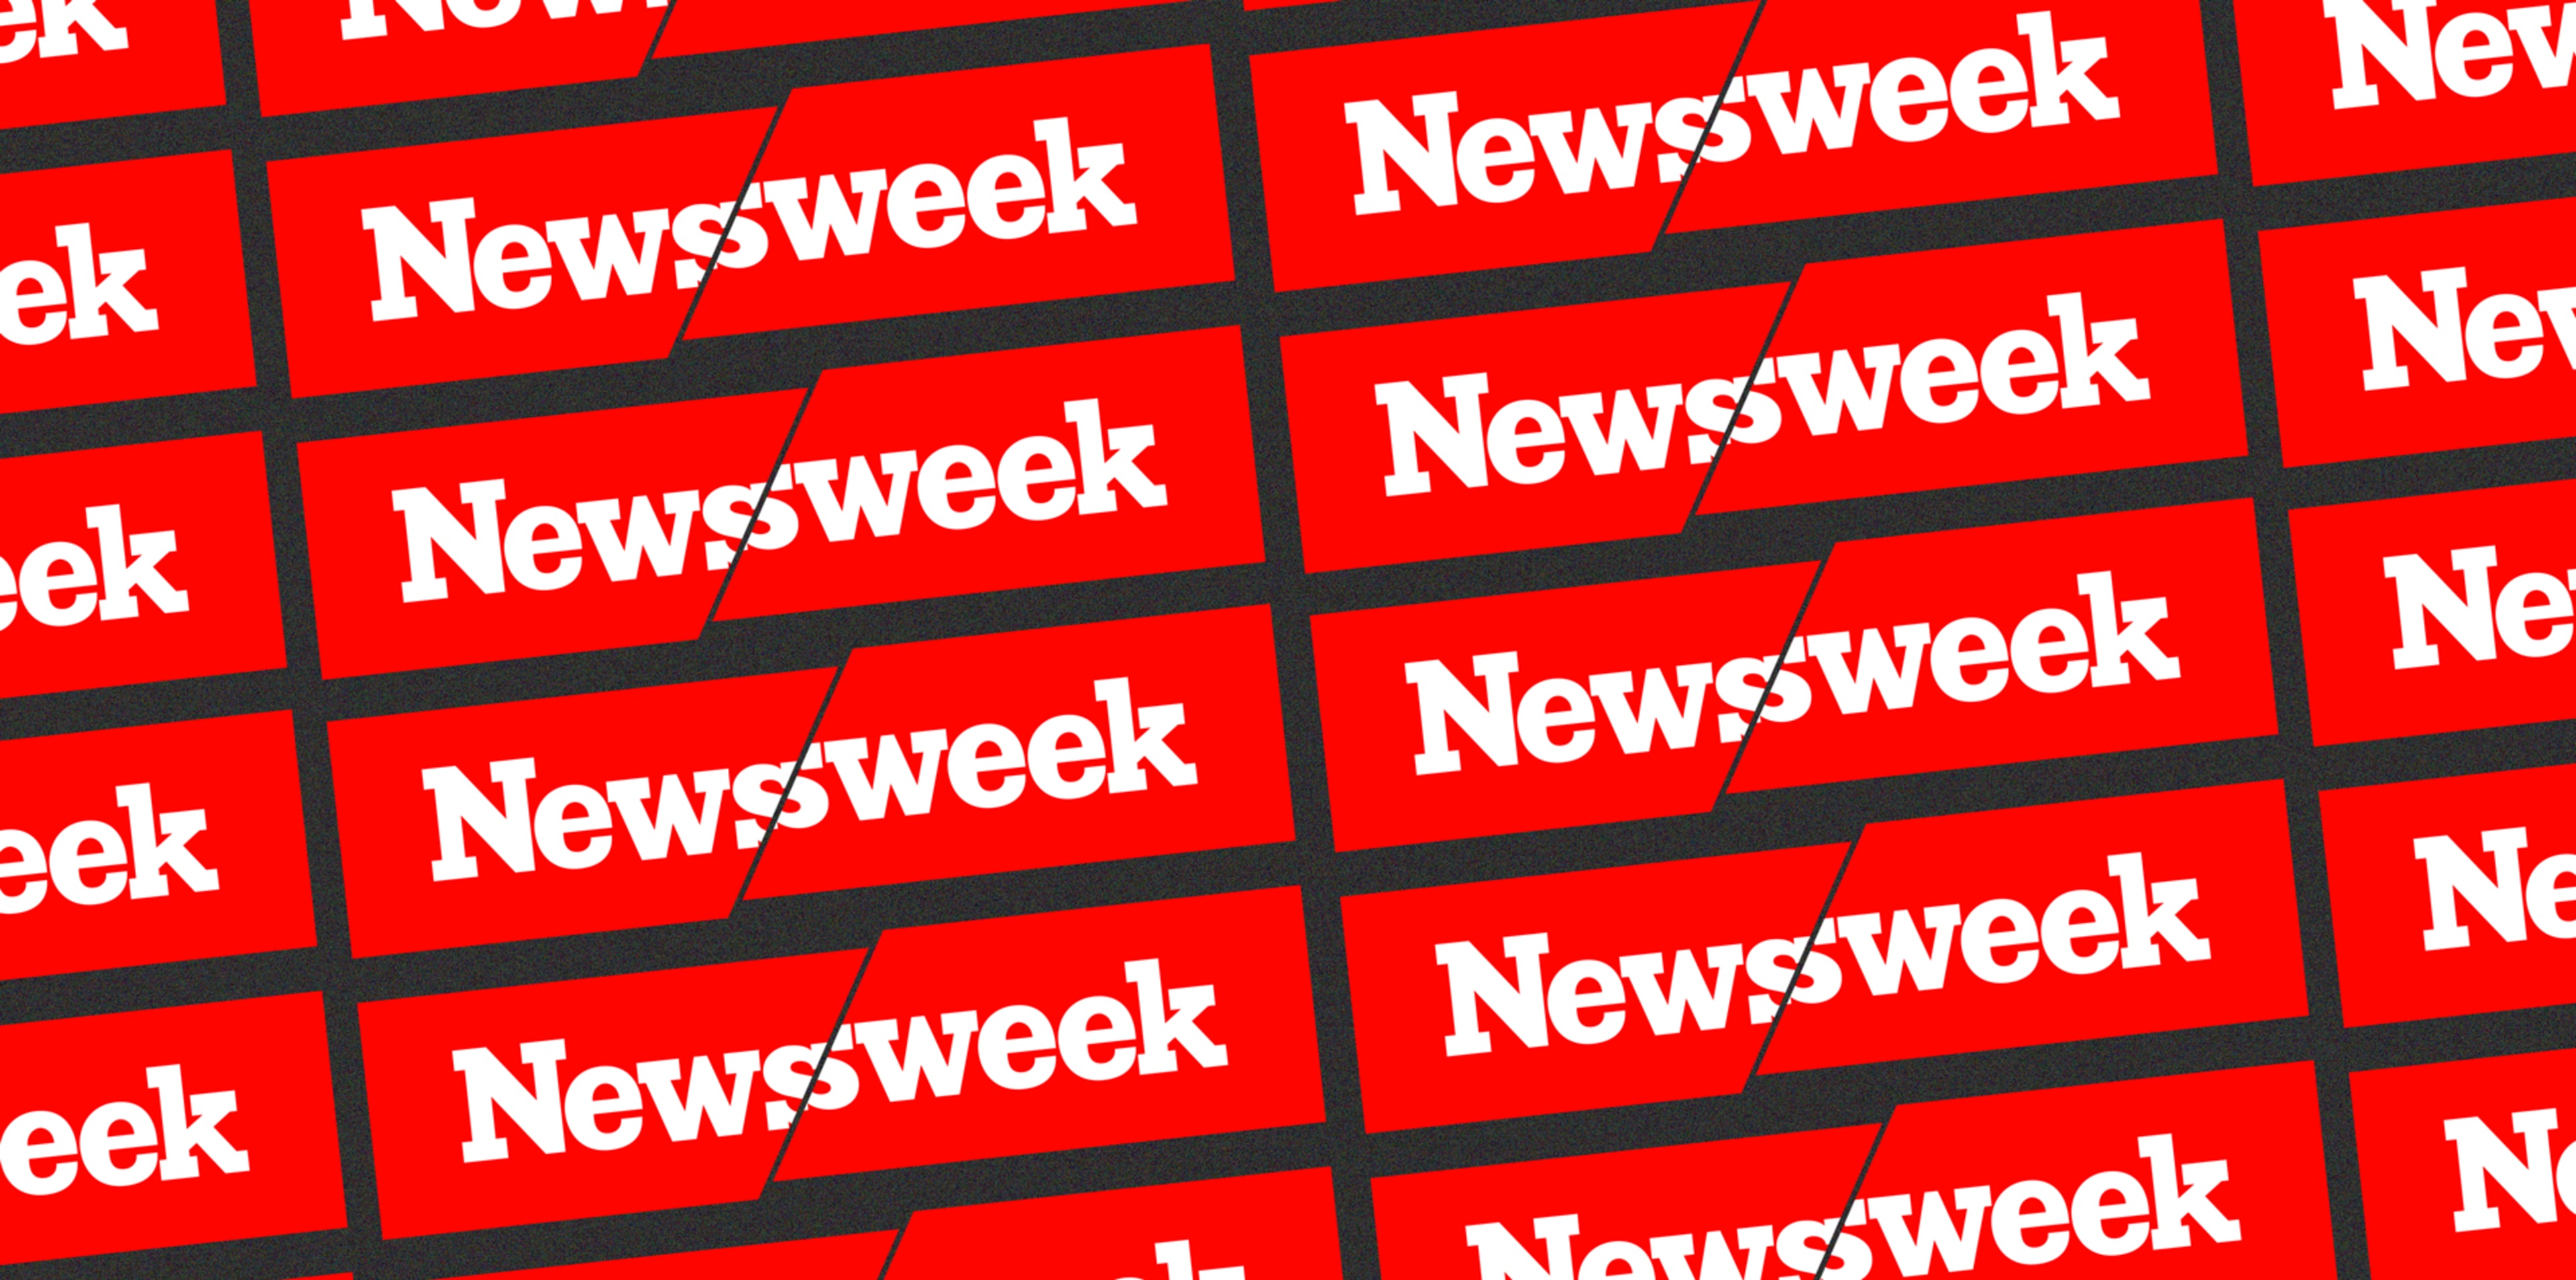 Newsweek In Turmoil: Here’s What You Need To Know